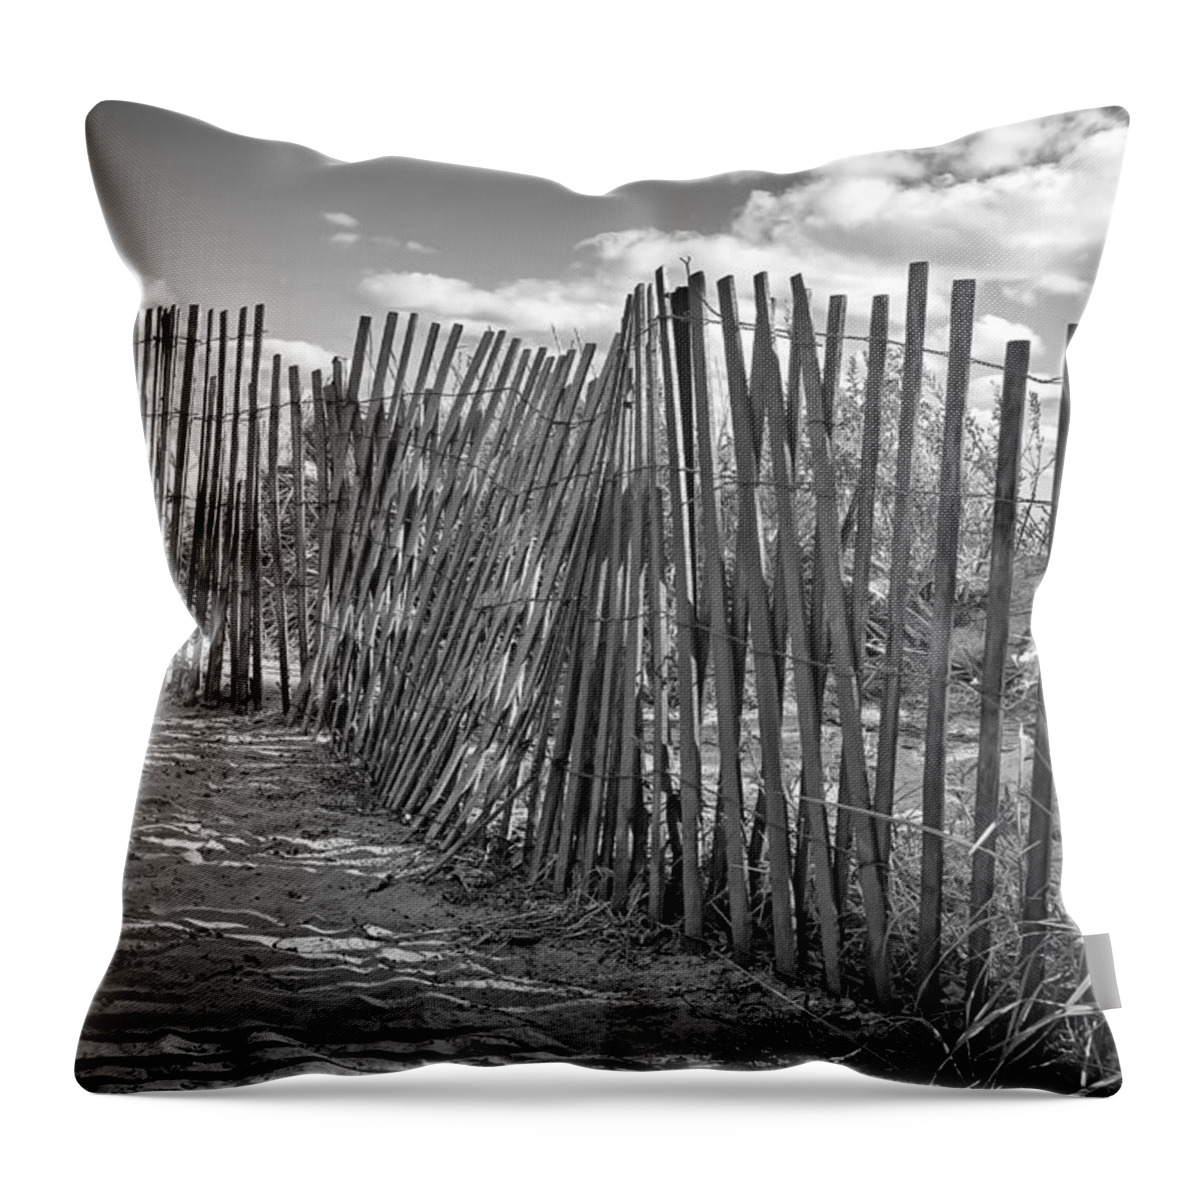 Beach Throw Pillow featuring the photograph The Beach Fence by Scott Norris